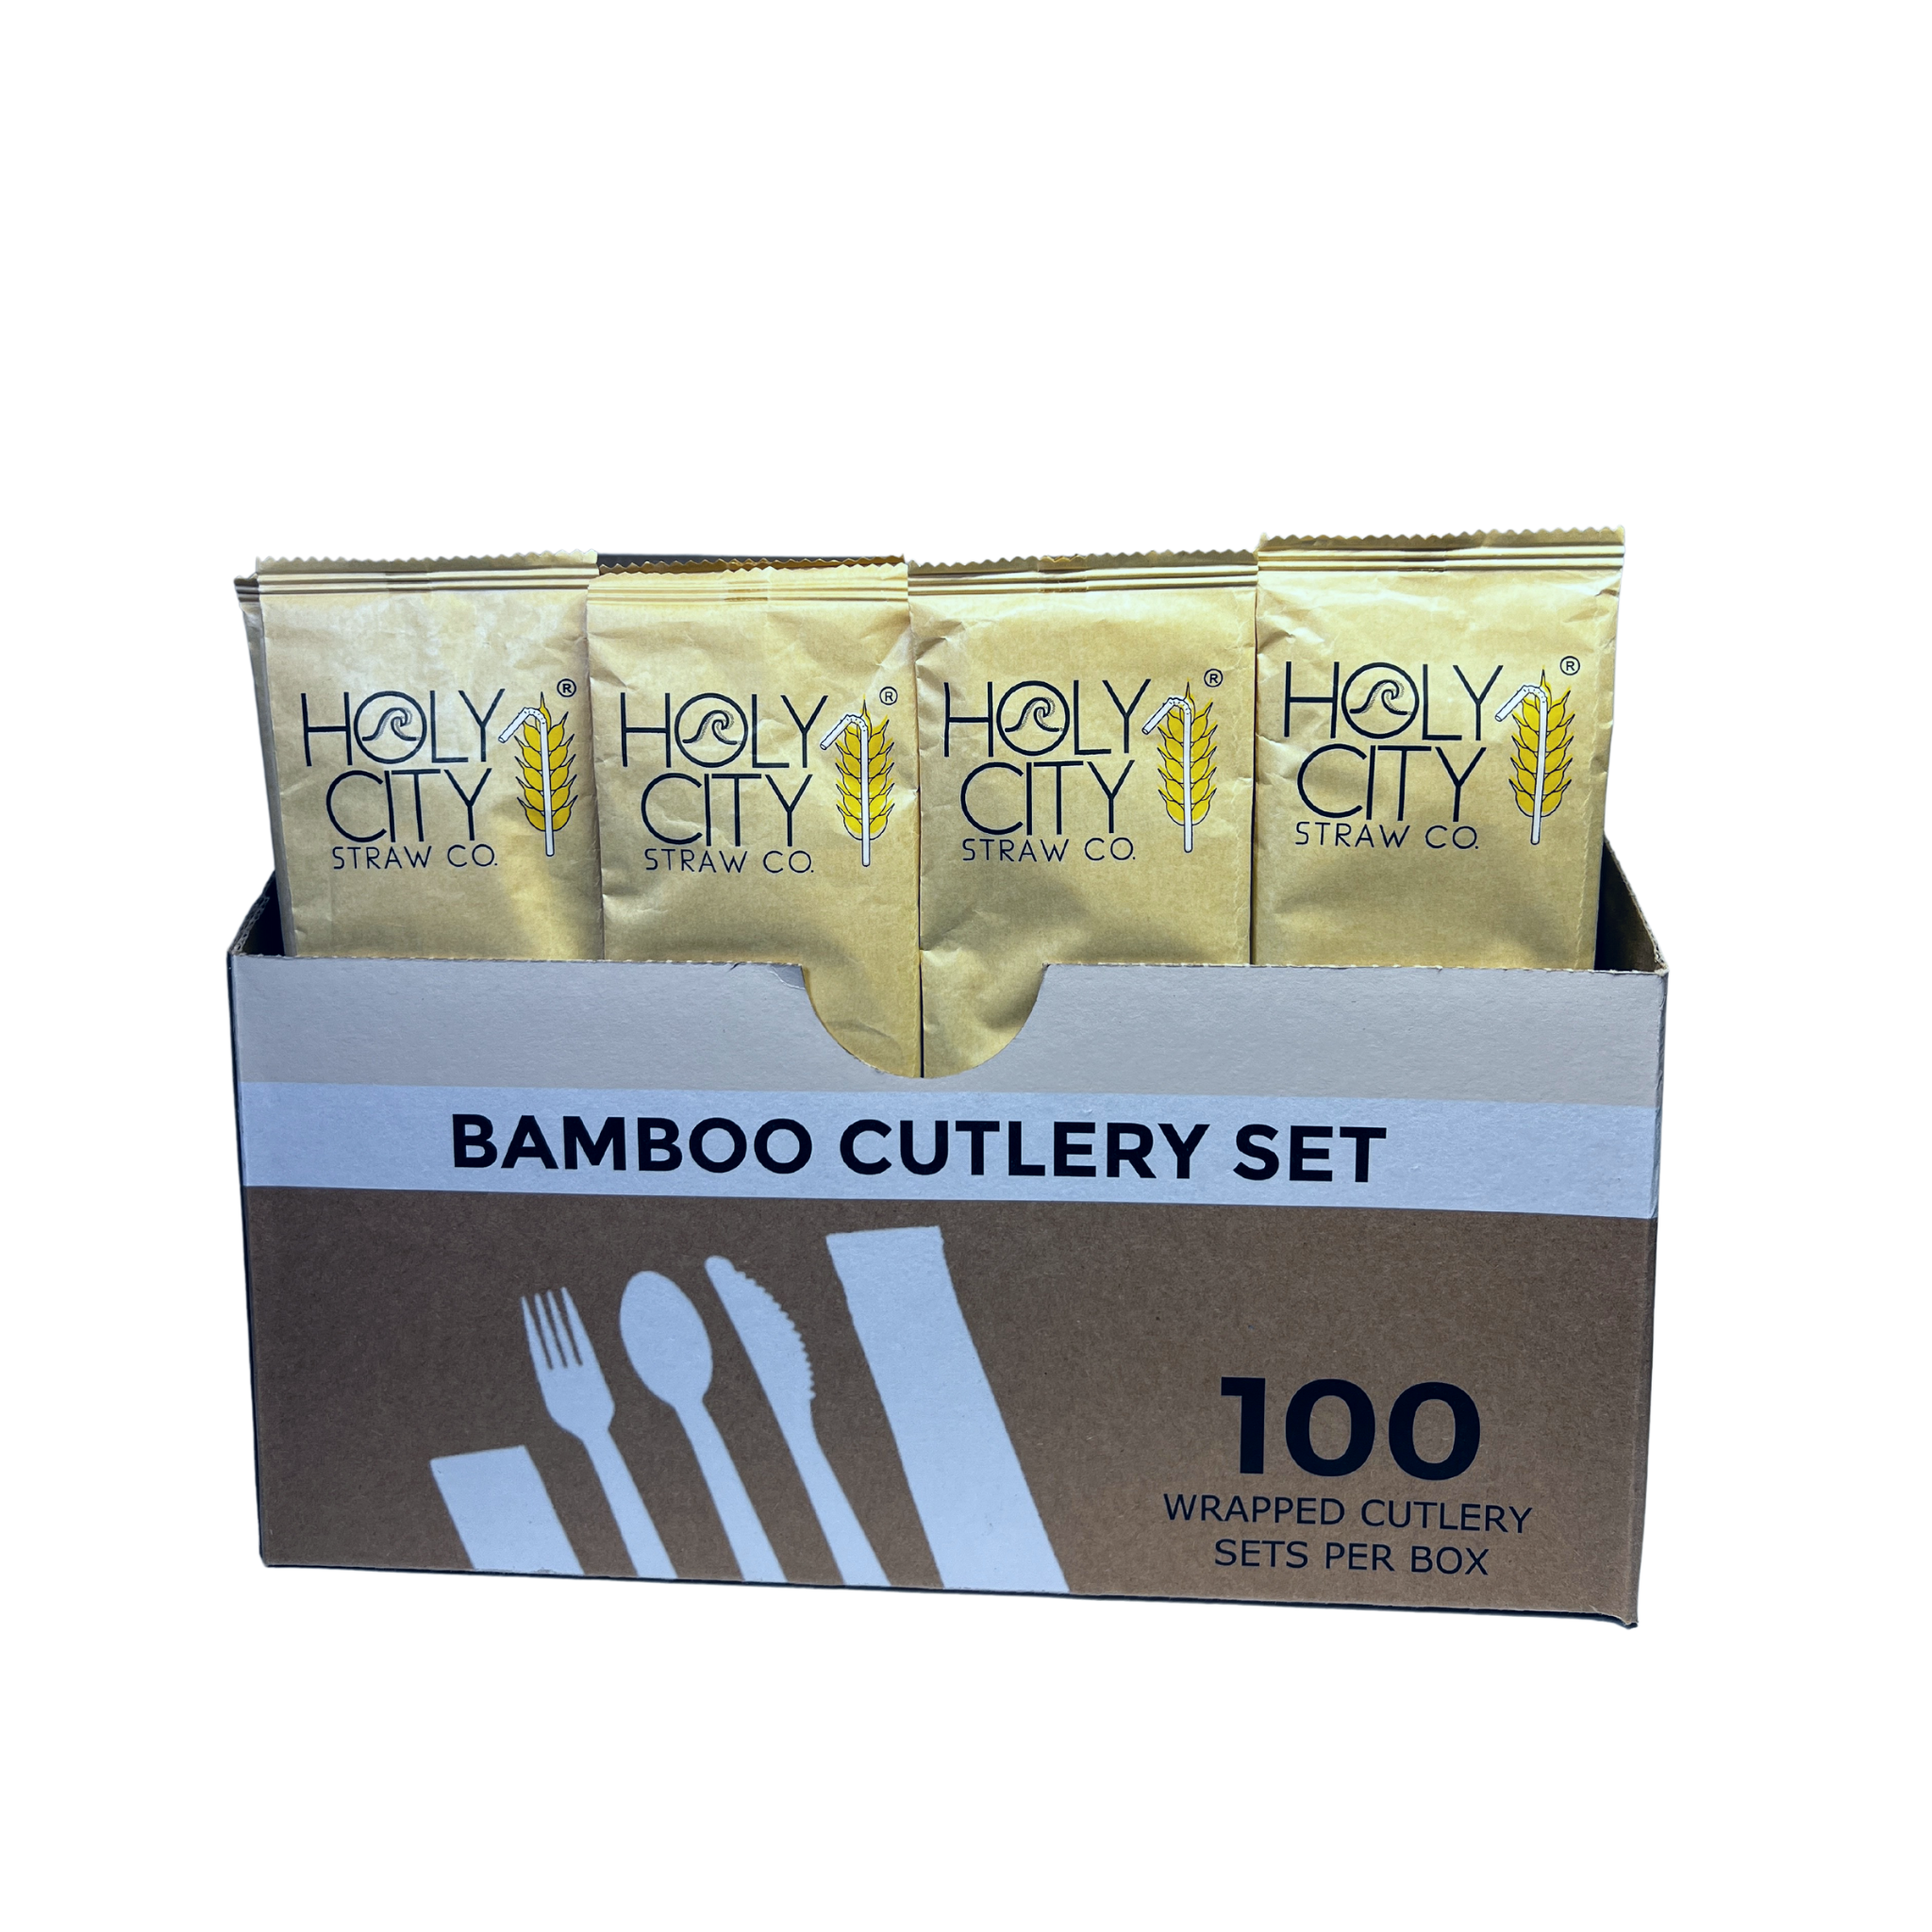 Holy City Straw Co Bamboo Cutlery Set 100ct Opened Box